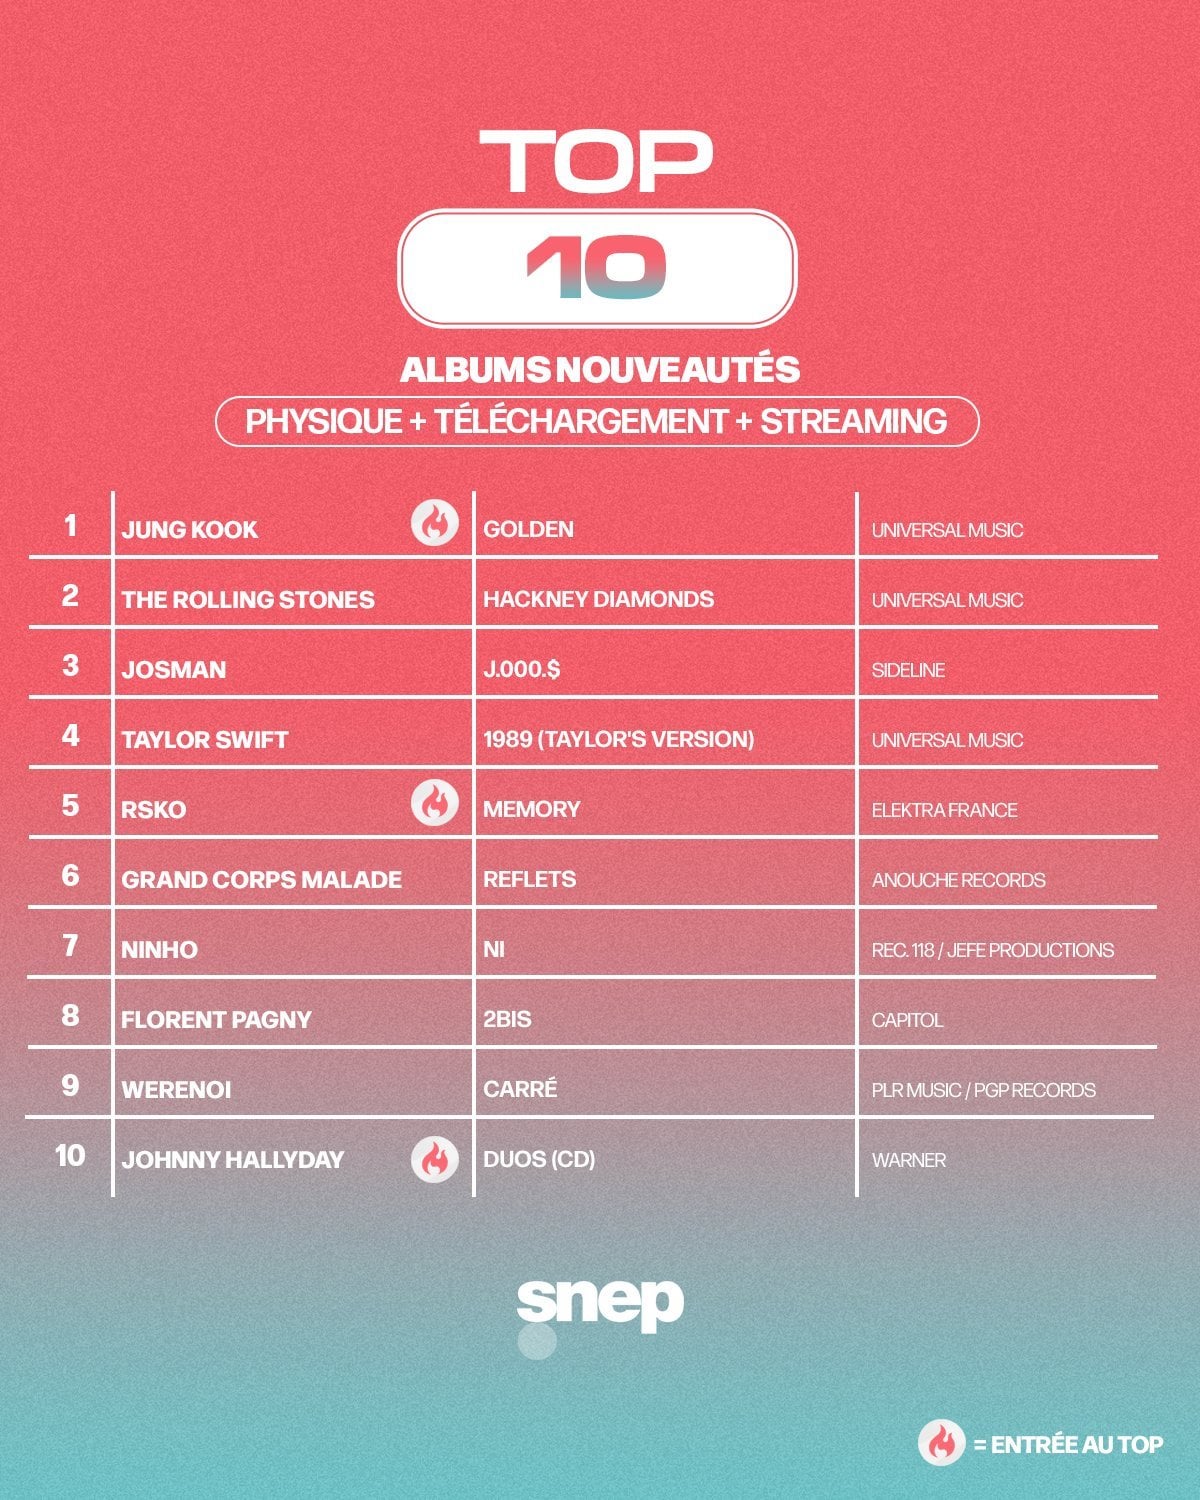 231110 Jungkook's "GOLDEN" debuts at #1 on SNEP Album Chart, joining Agust D's "D-DAY" as the only albums by Kpop soloist in history to top the chart. 🇫🇷